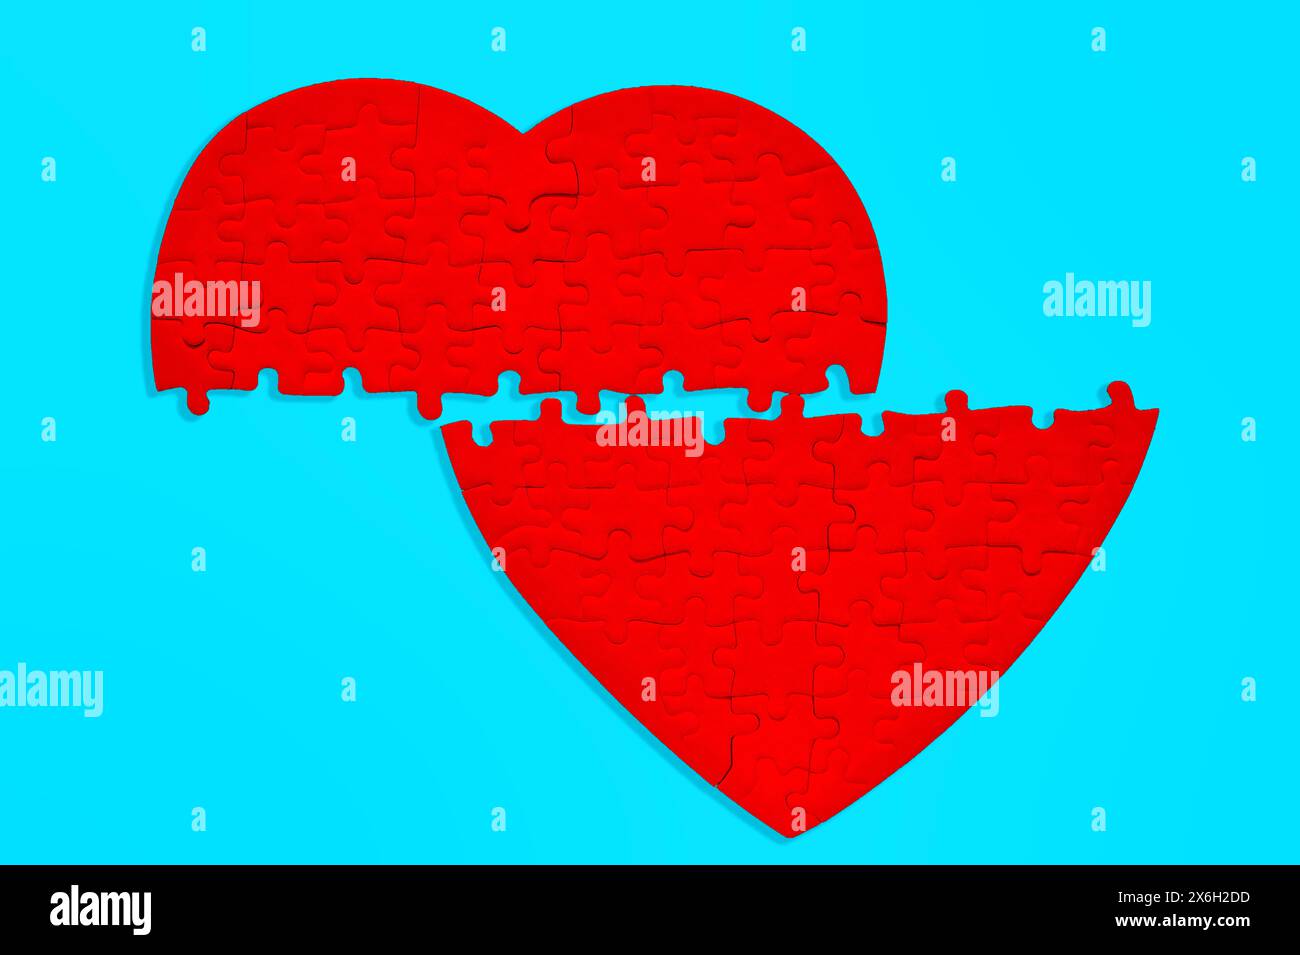 Red heart-shaped puzzle, halved and laid on a light blue surface. The fragmented pieces symbolize emotional disconnection or fractured relationships. Stock Photo